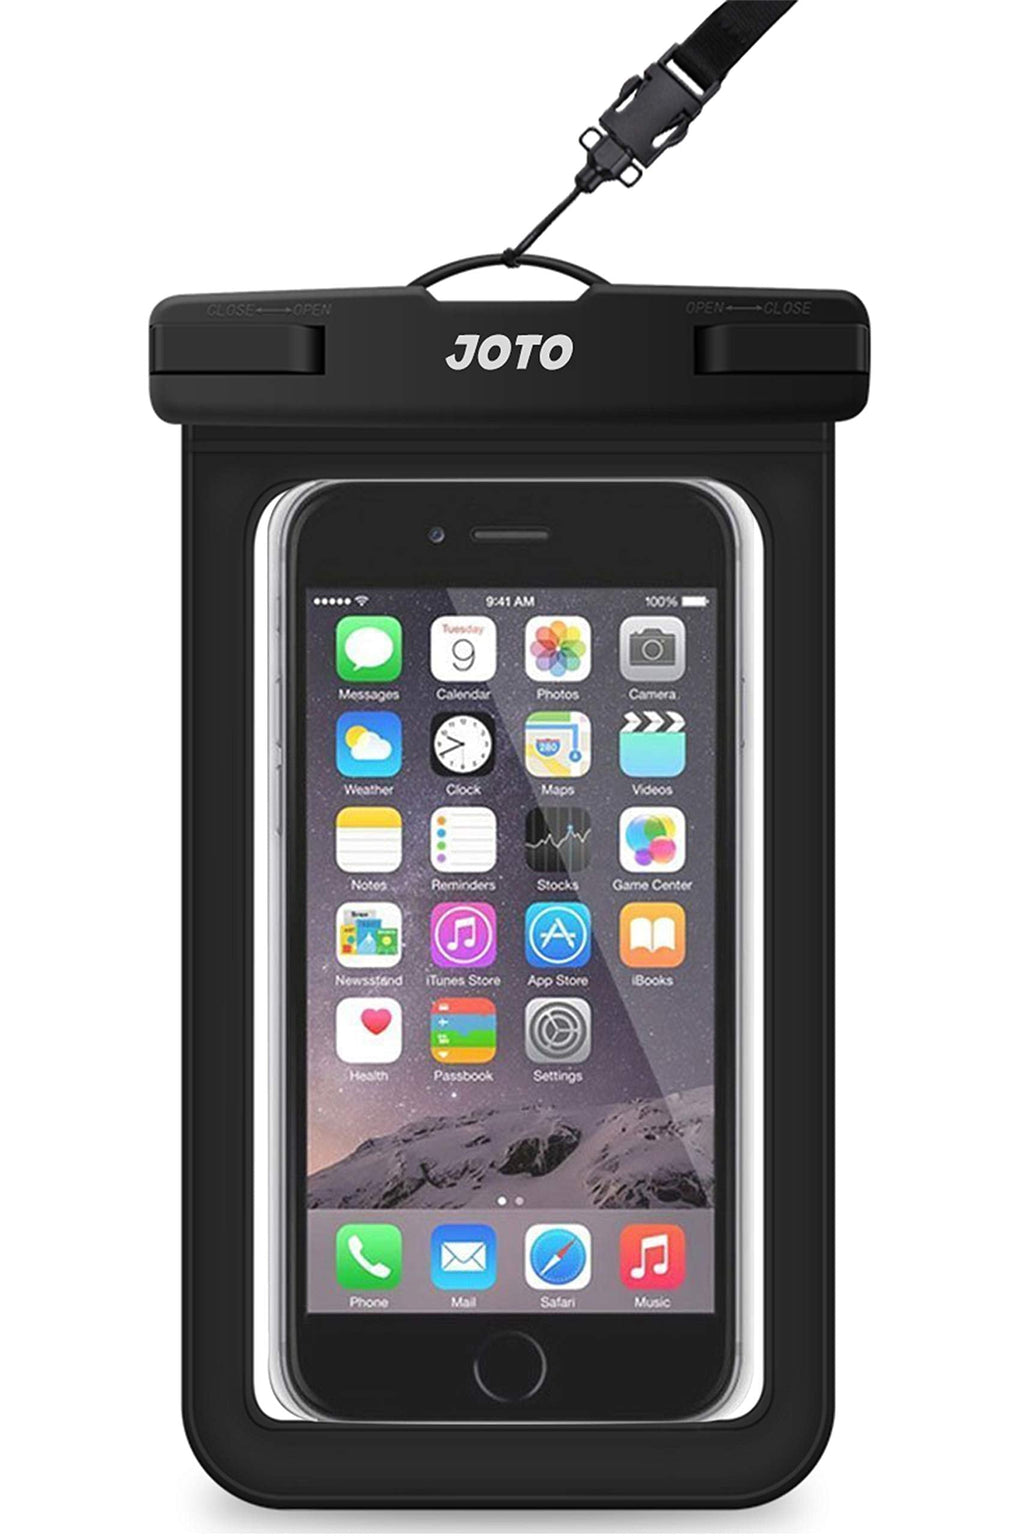 JOTO Universal Waterproof Phone Pouch Cellphone Dry Bag Case Compatible with iPhone 13 12 11 Pro Max Mini Xs XR X 8 7 6S Plus SE, Galaxy S21 S20 S10 Plus Note 10+ 9, Pixel 4 XL up to 7" -Black Black